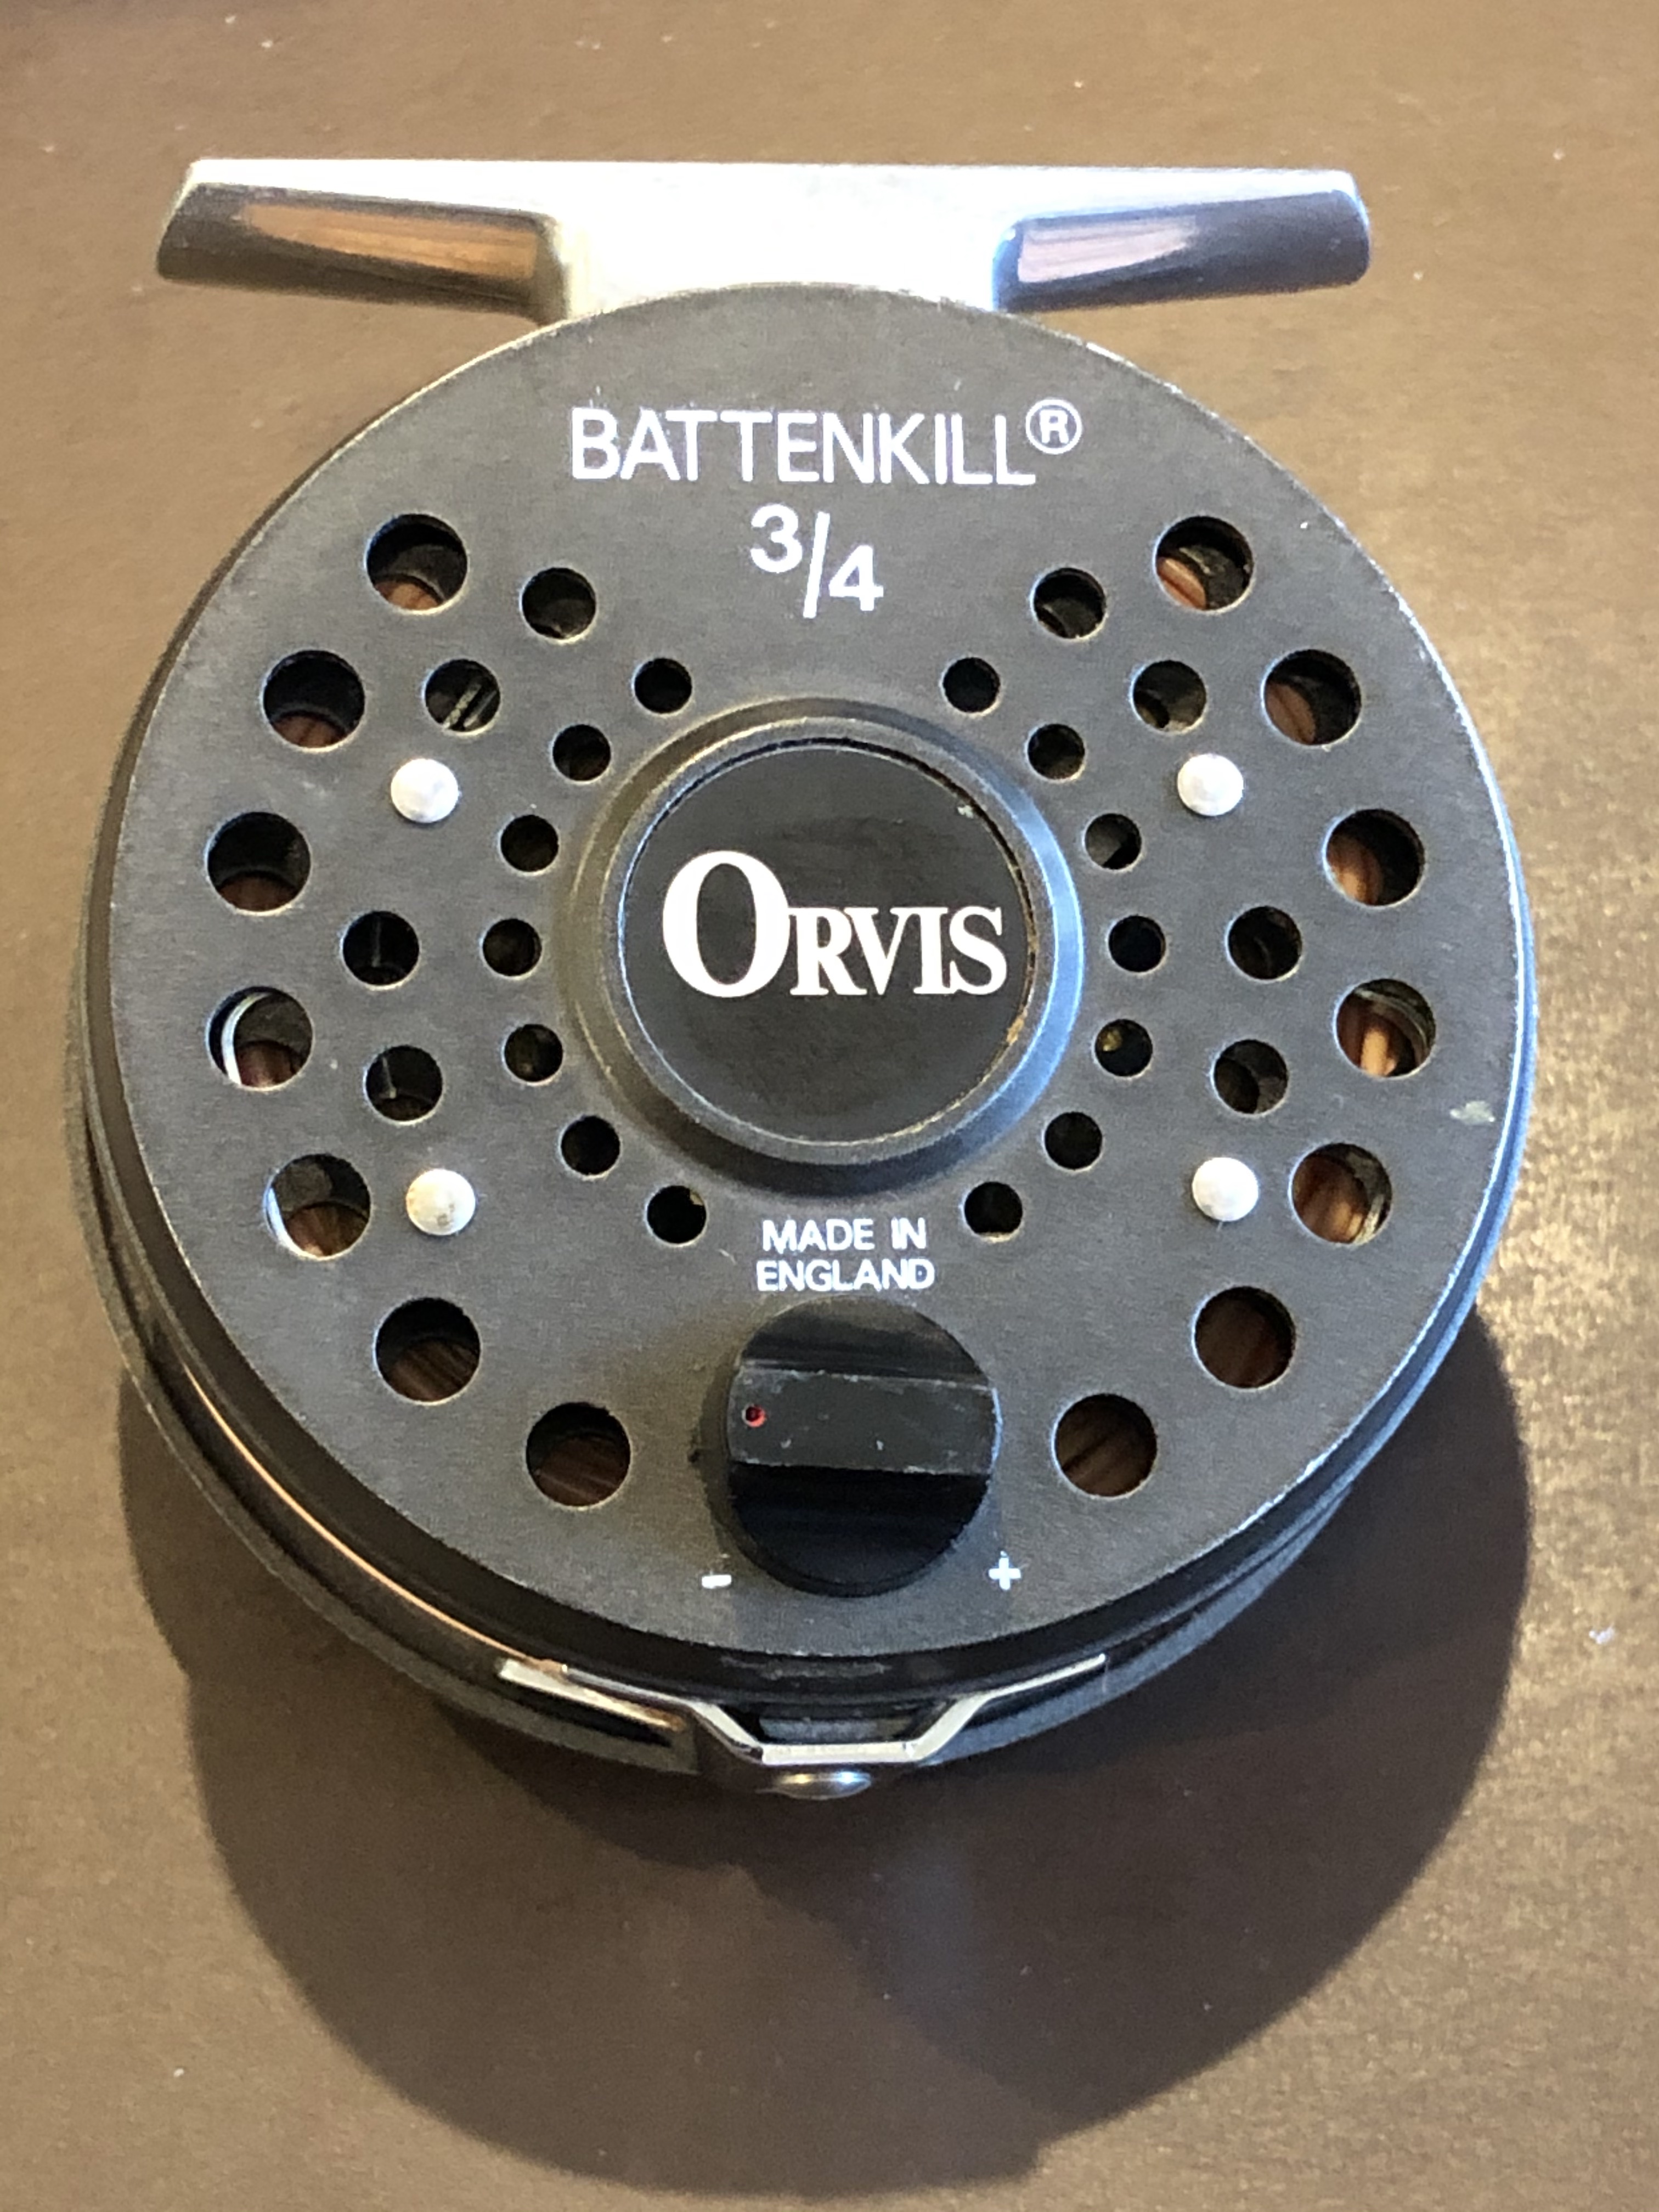 Parts for Orvis Battenkill 3/4 - Made in England